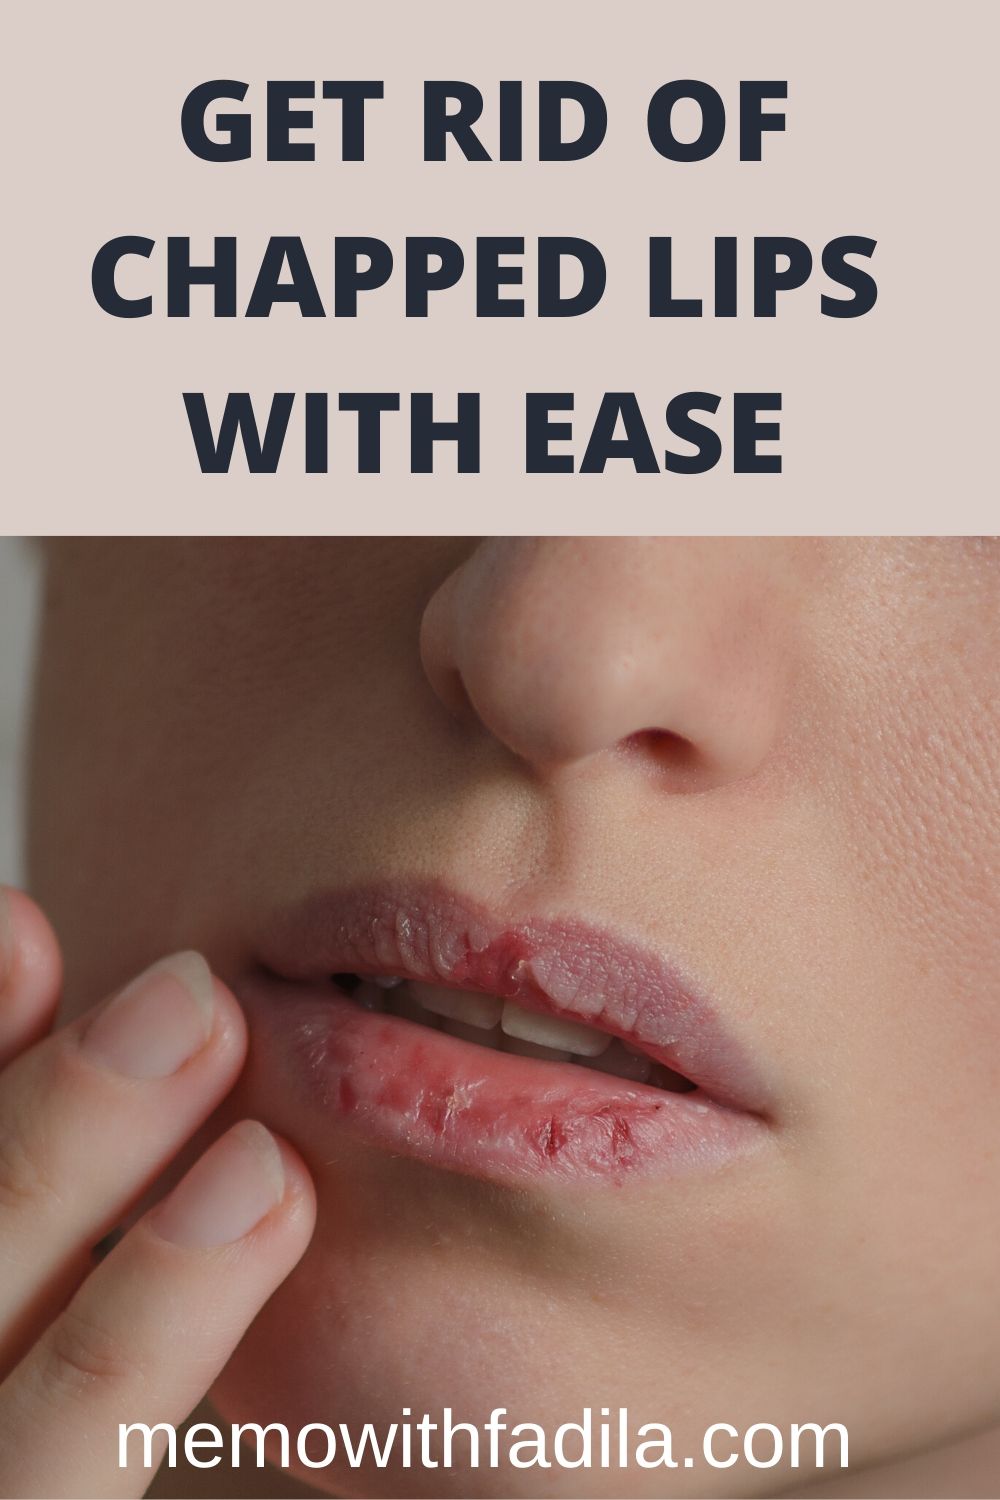 Get Rid Of Chapped Lips With Ease Memo With Fadila 0724